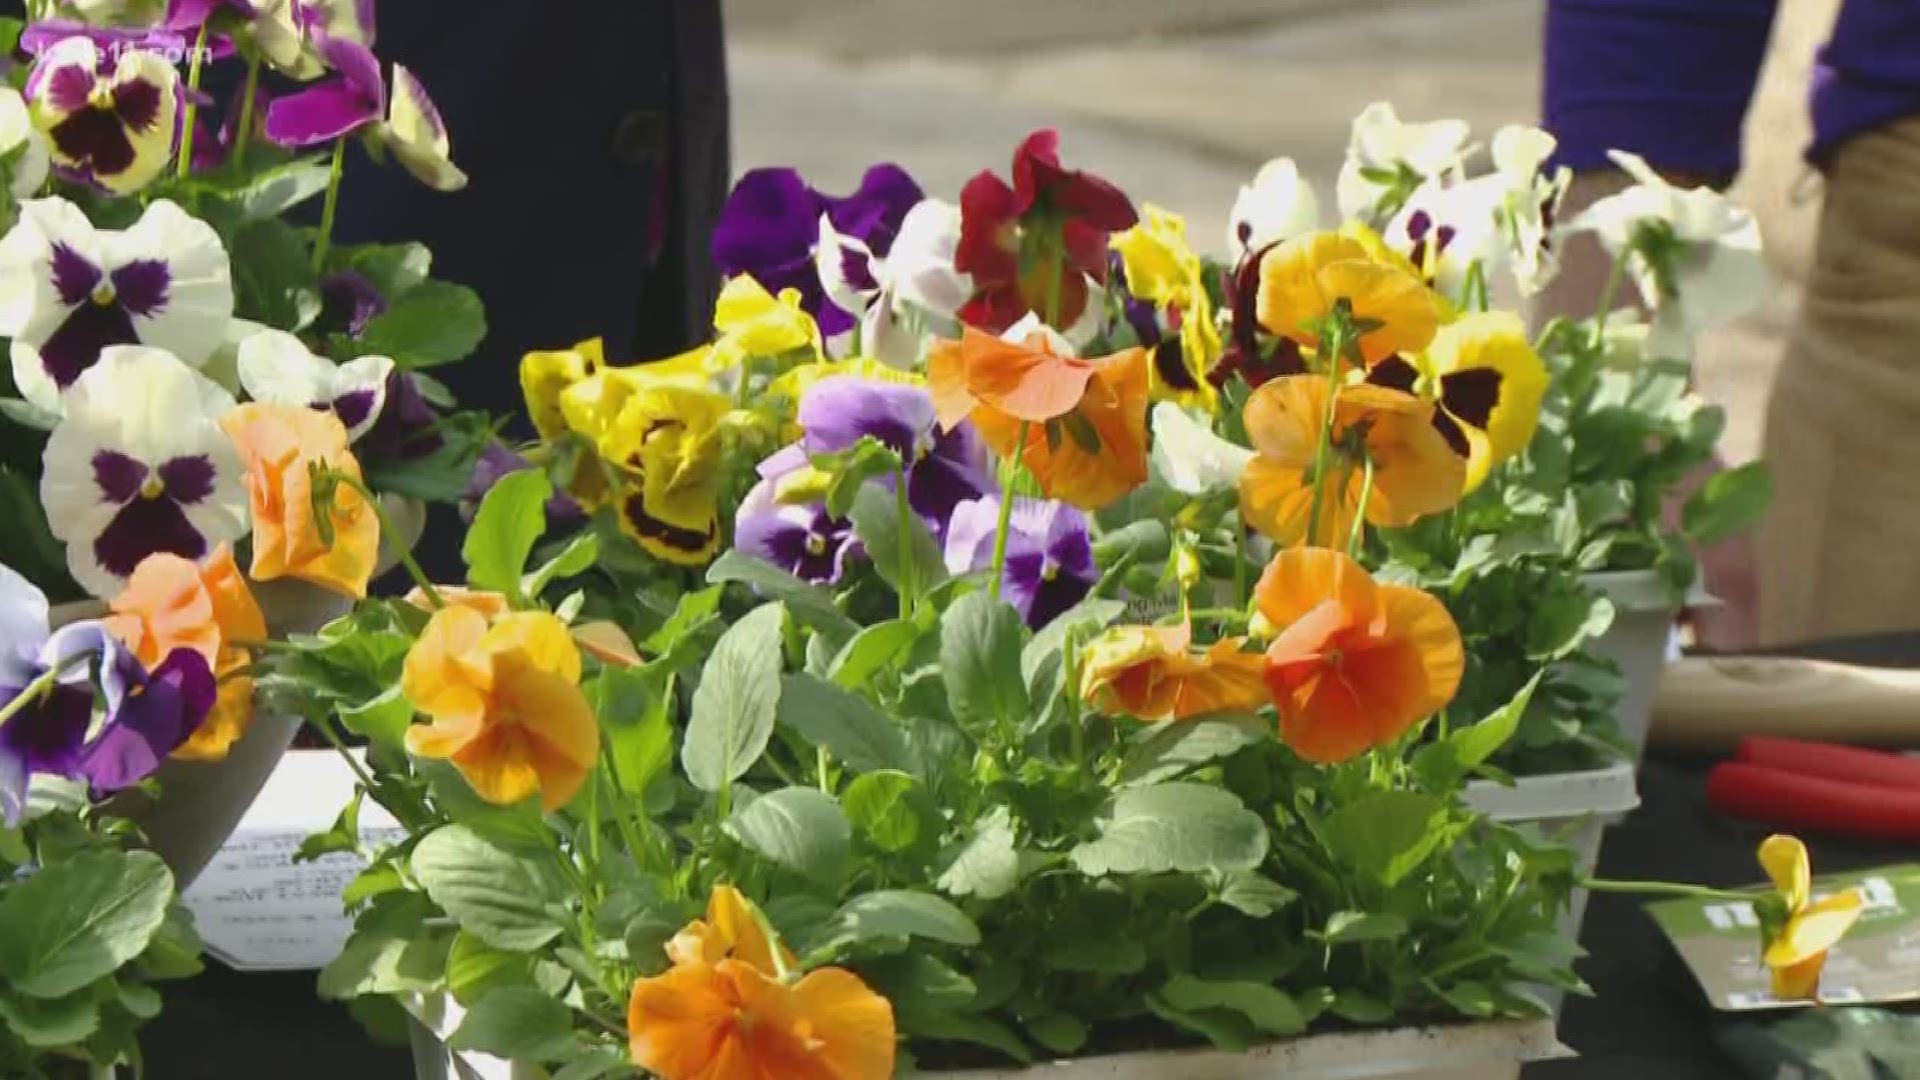 From winter clean up to planting early season flowers in pots, welcome the season. Adam Bachman from Bachman's says spring is the perfect time to clean up what the previous season left behind and welcome new growth. https://kare11.tv/2UHggem